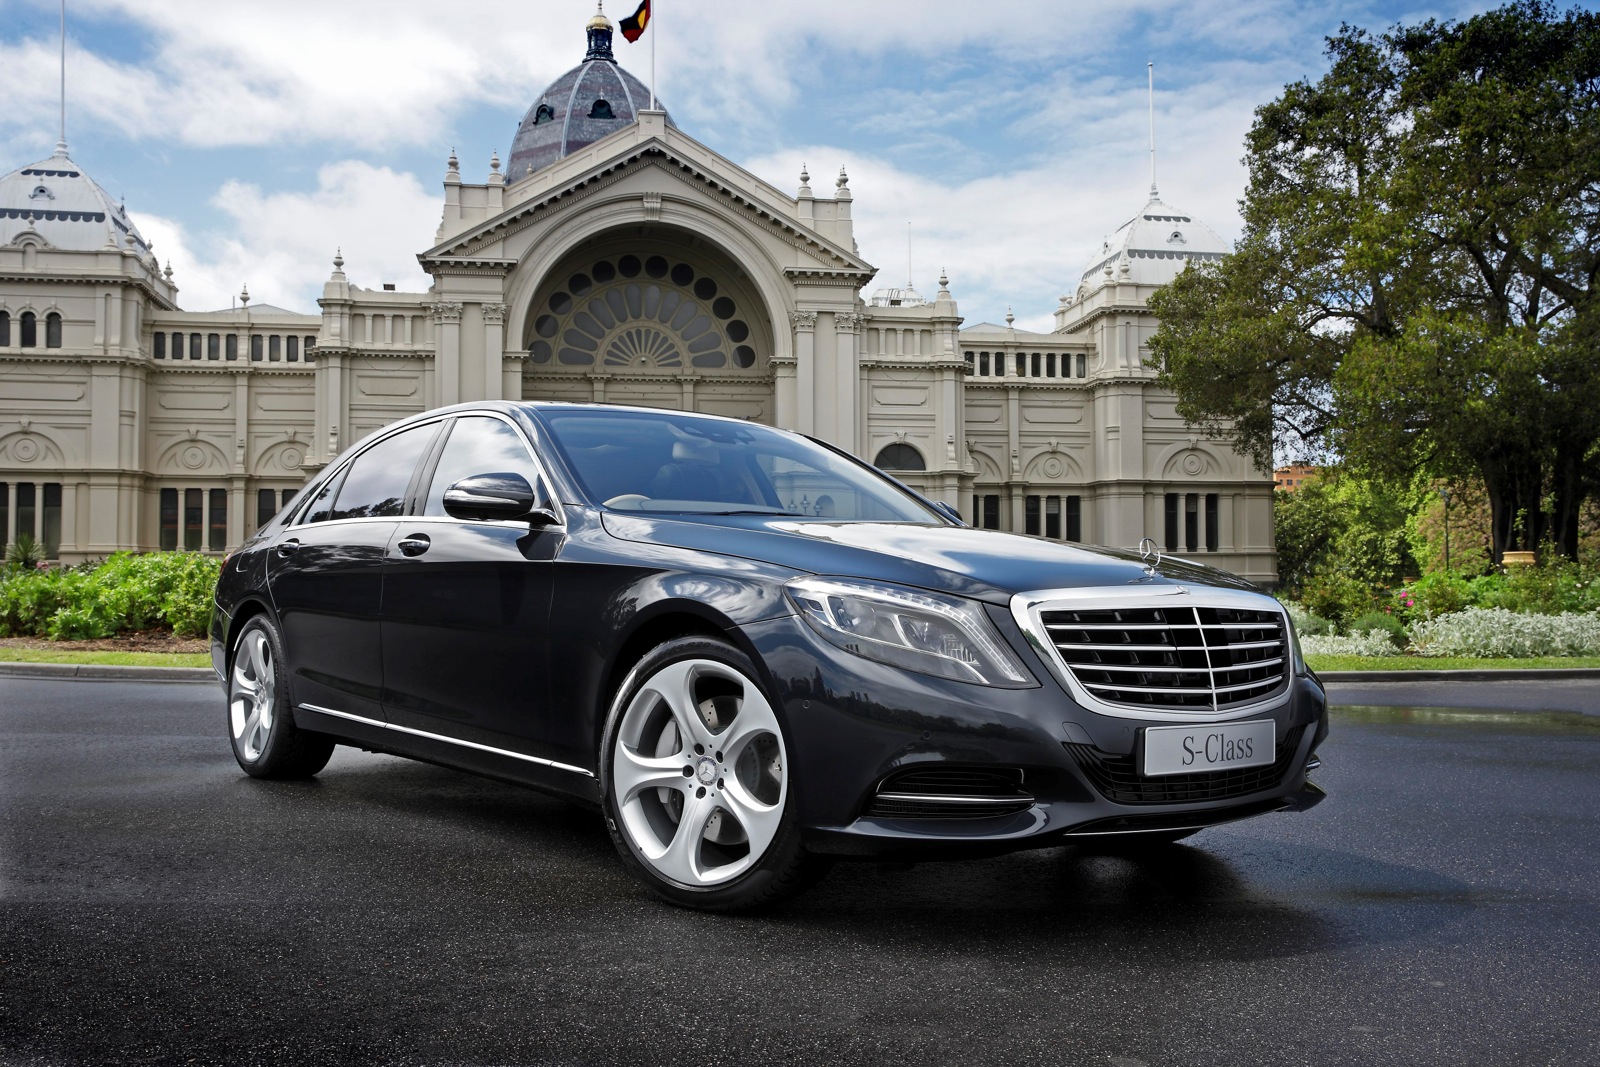 2014 Mercedes-Benz S-Class unveiled in Melbourne - Photos (1 of 6)